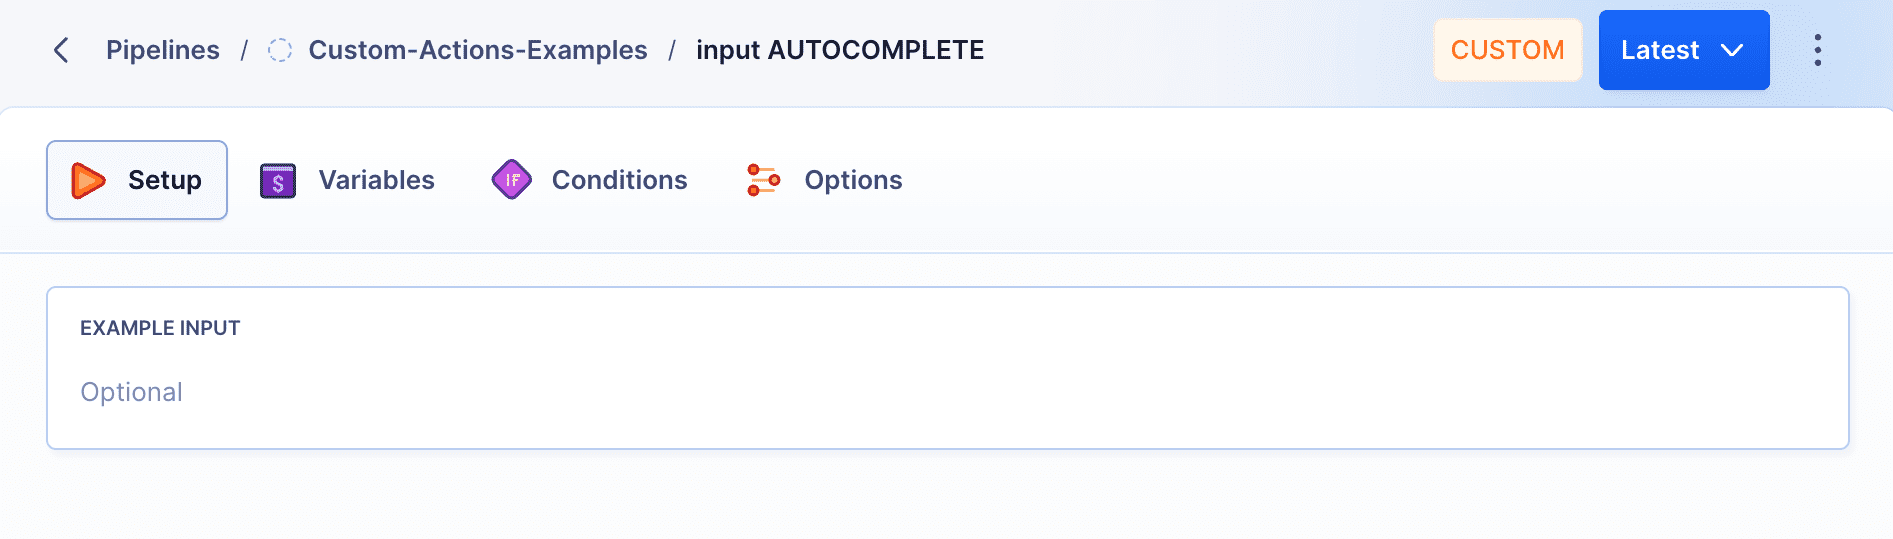 Custom action with AUTOCOMPLETE inputs